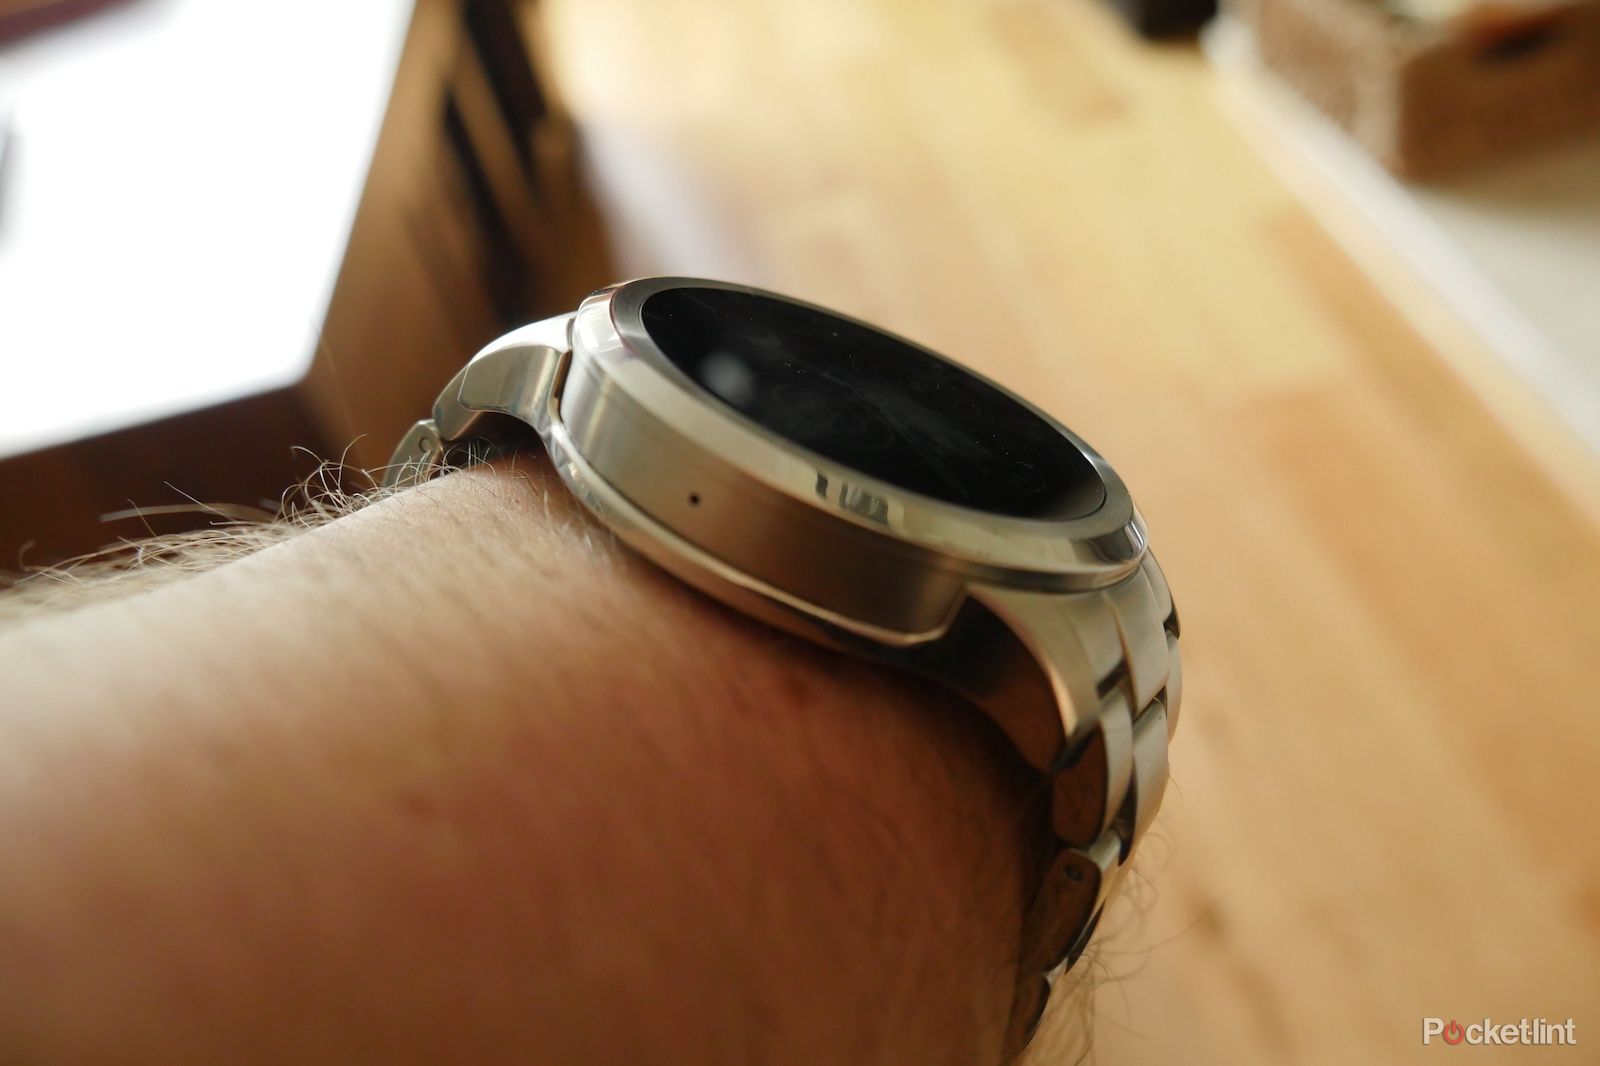 fossil q founder review image 5